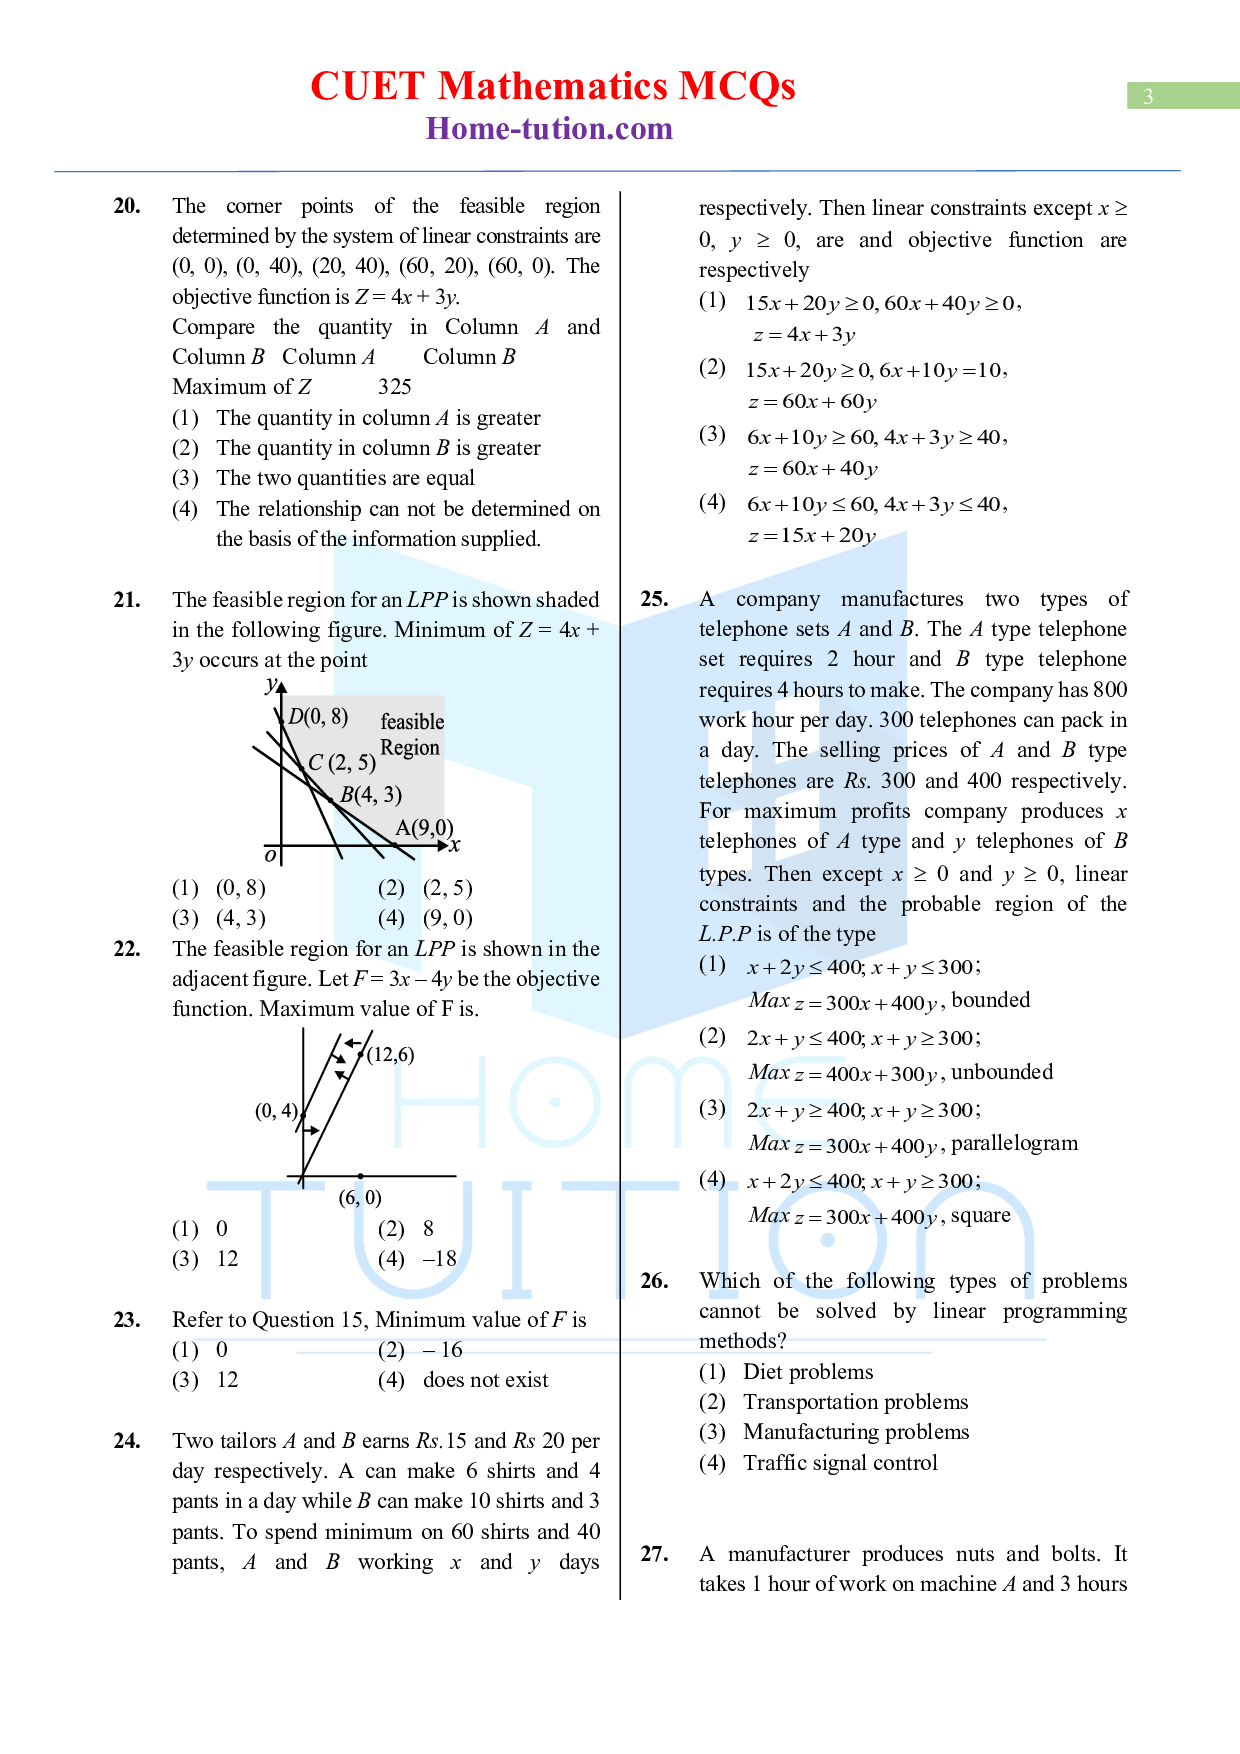 CUET MCQ Questions For Maths Chapter-9 Linear programming